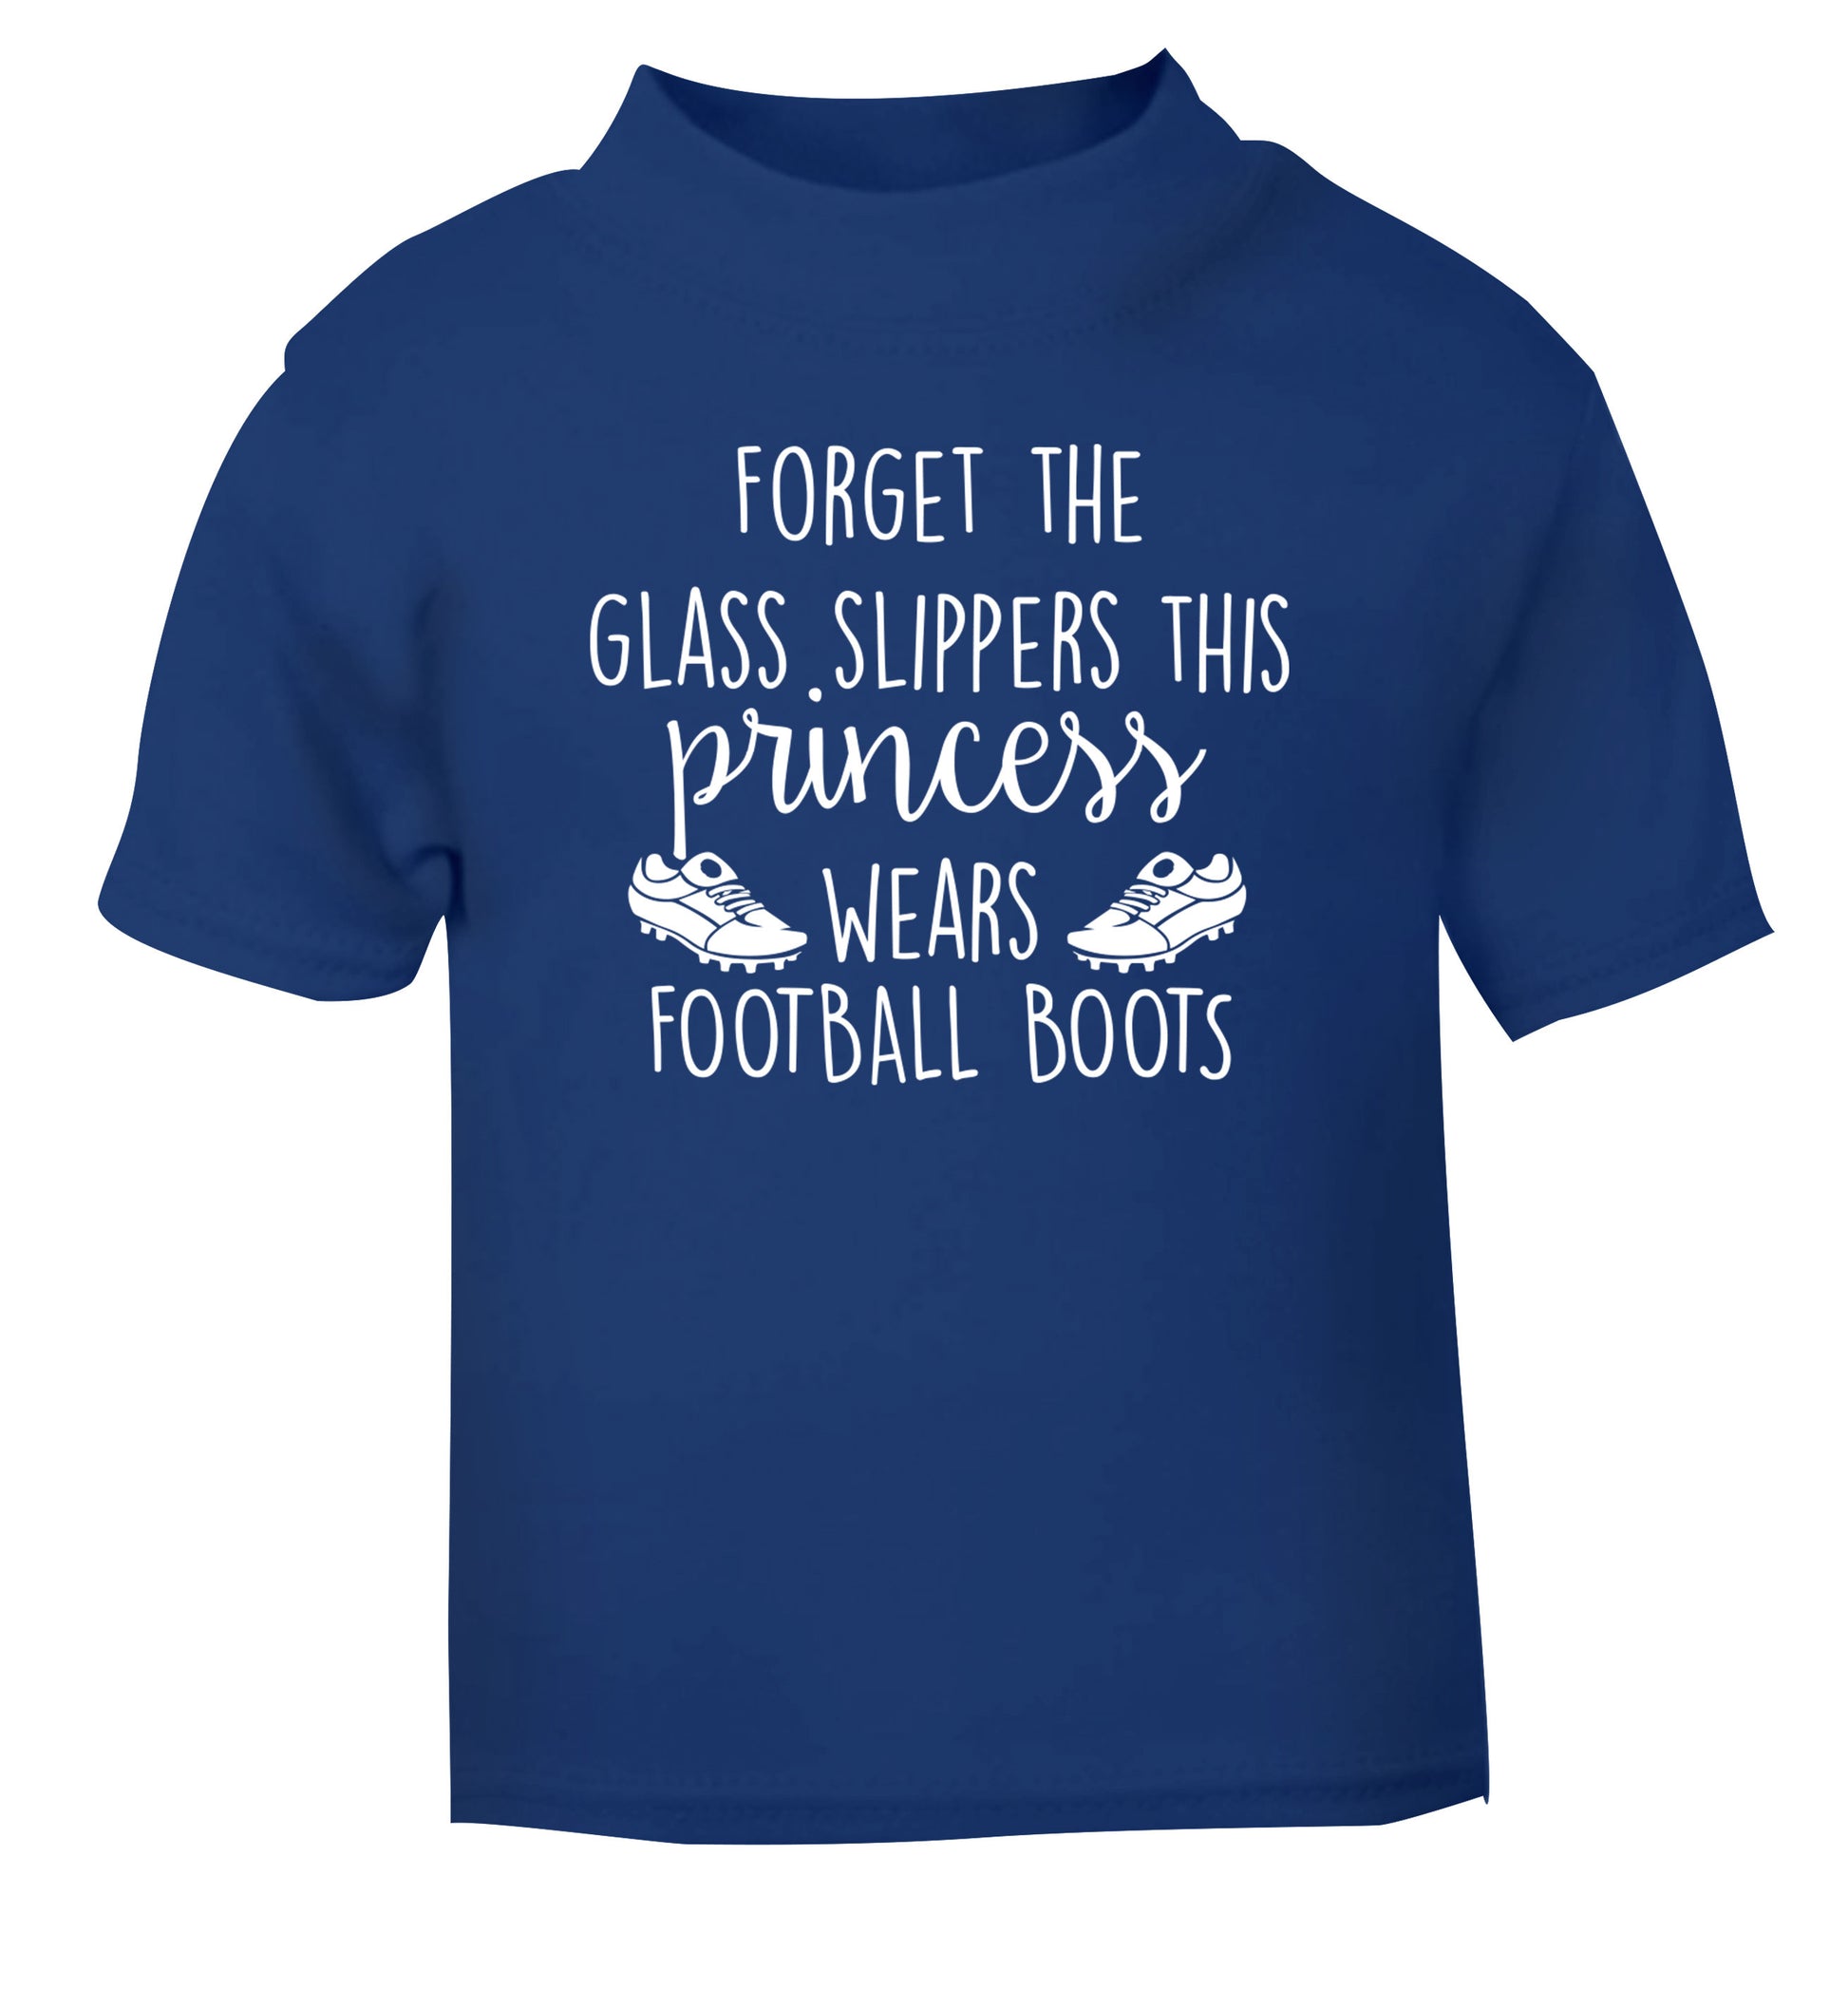 Forget the glass slippers this princess wears football boots blue Baby Toddler Tshirt 2 Years